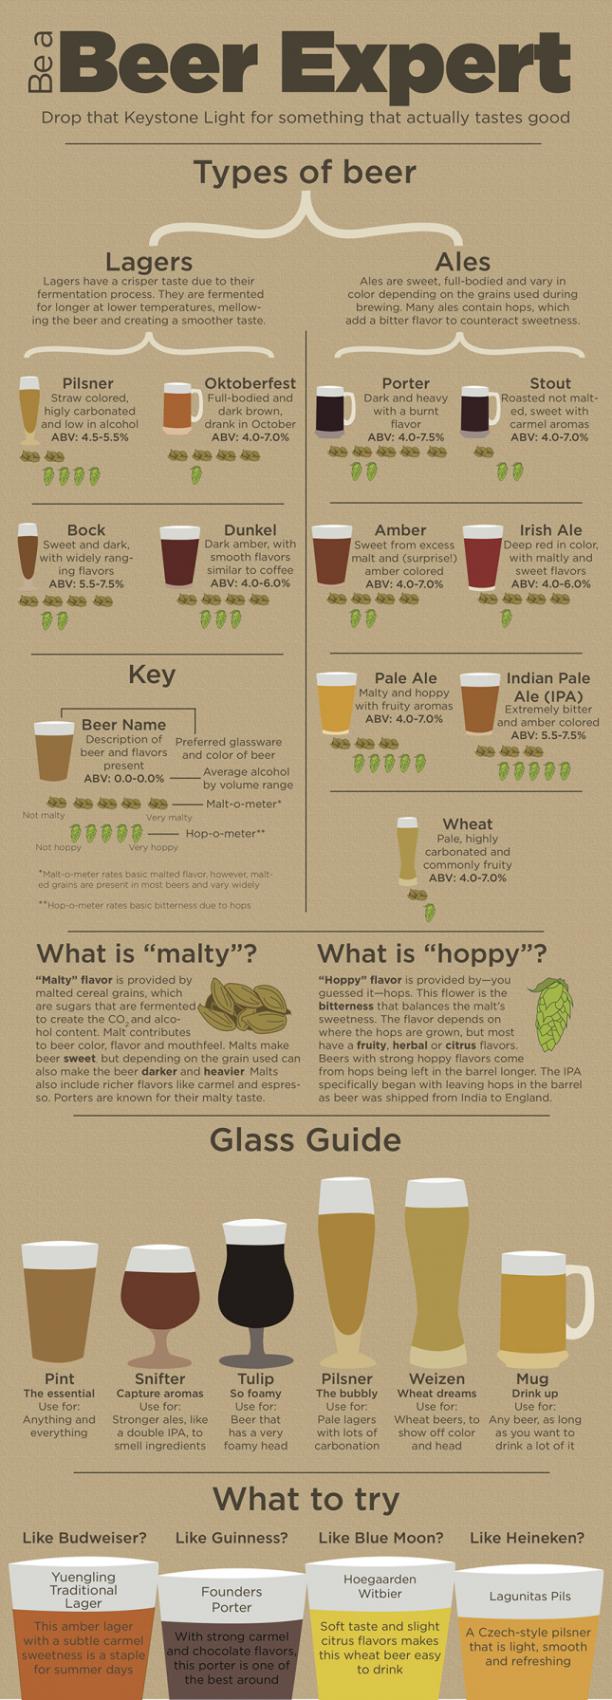 How to Be a Beer Expert